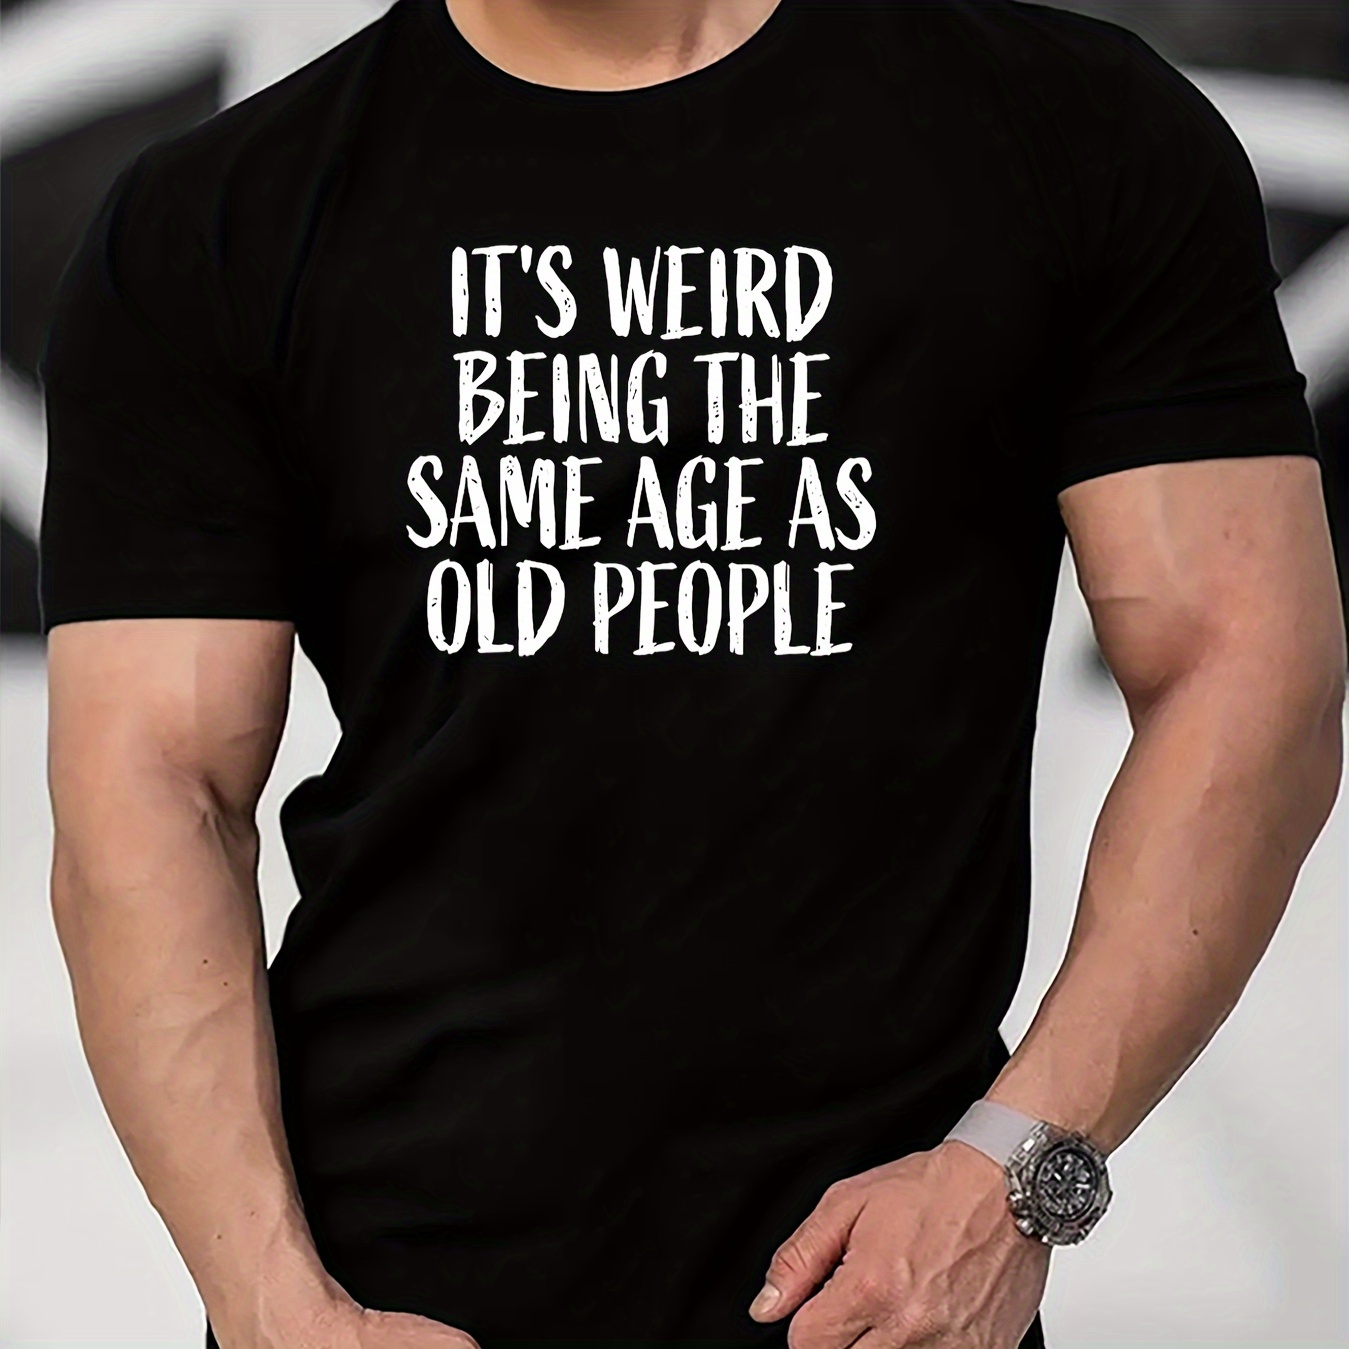 

Being The Same Age As Old People Print T Shirt, Tees For Men, Casual Short Sleeve T-shirt For Summer